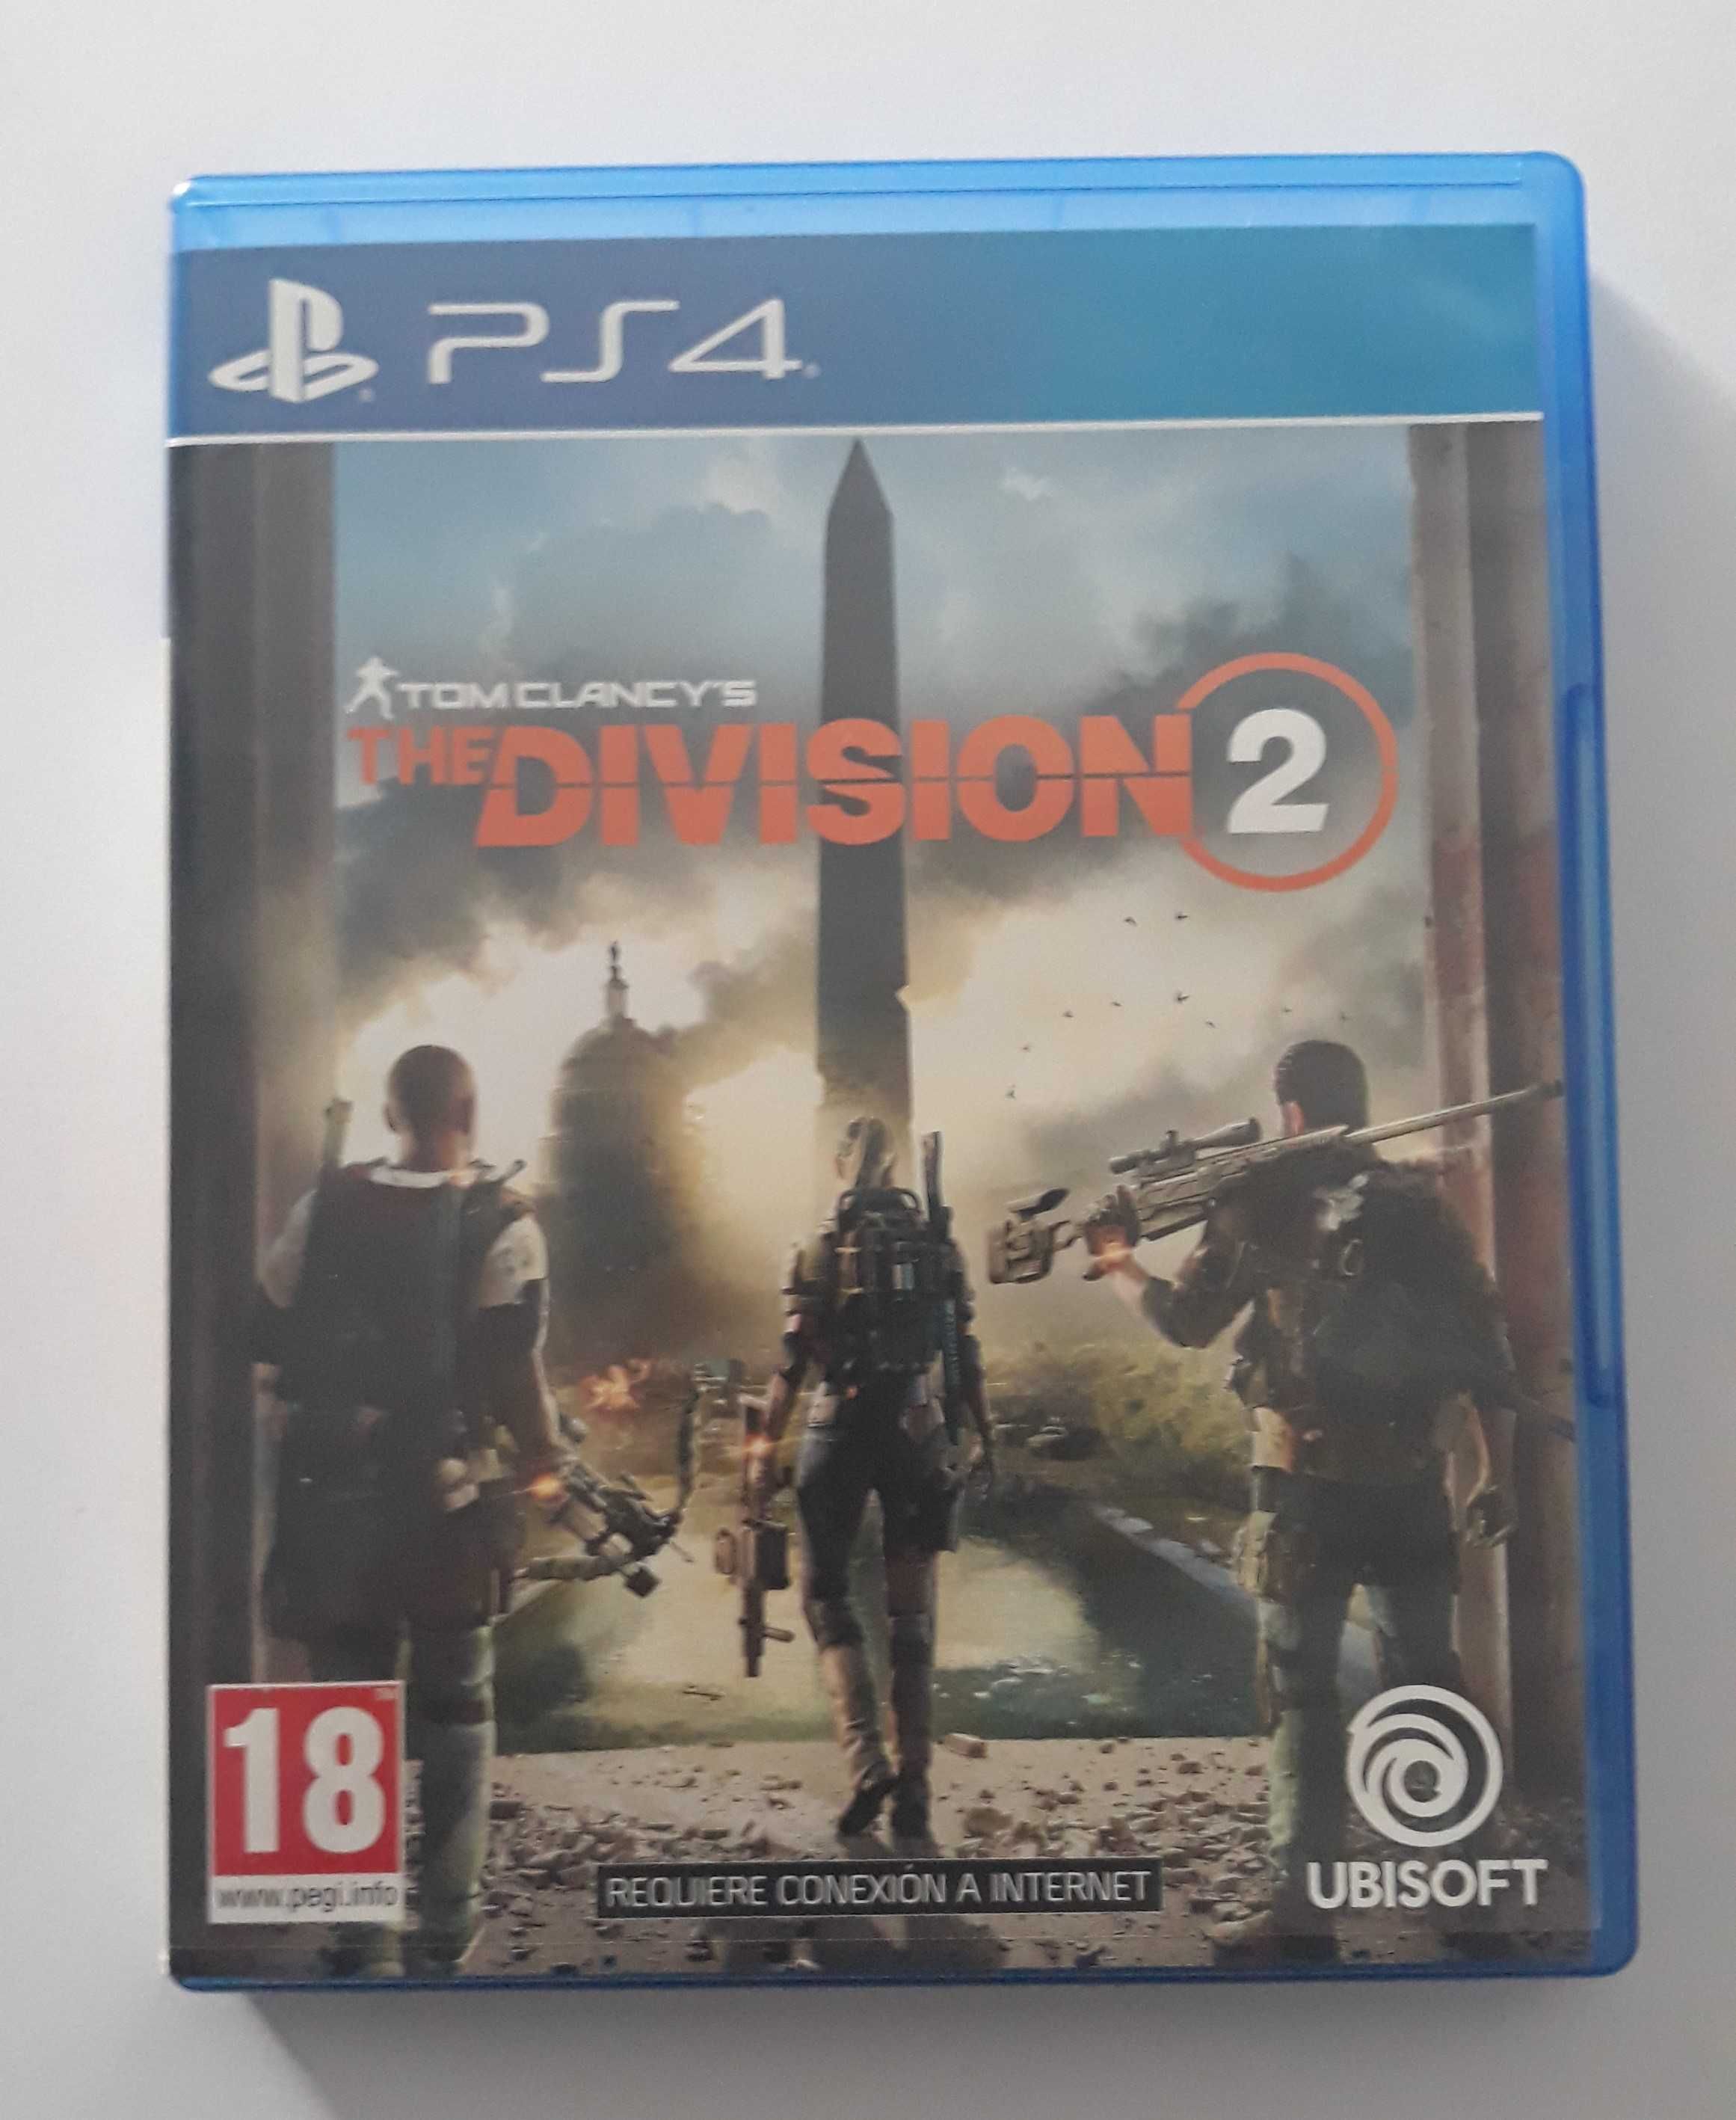 Jogo PS4 - Tom Clancy's "The Division 2"